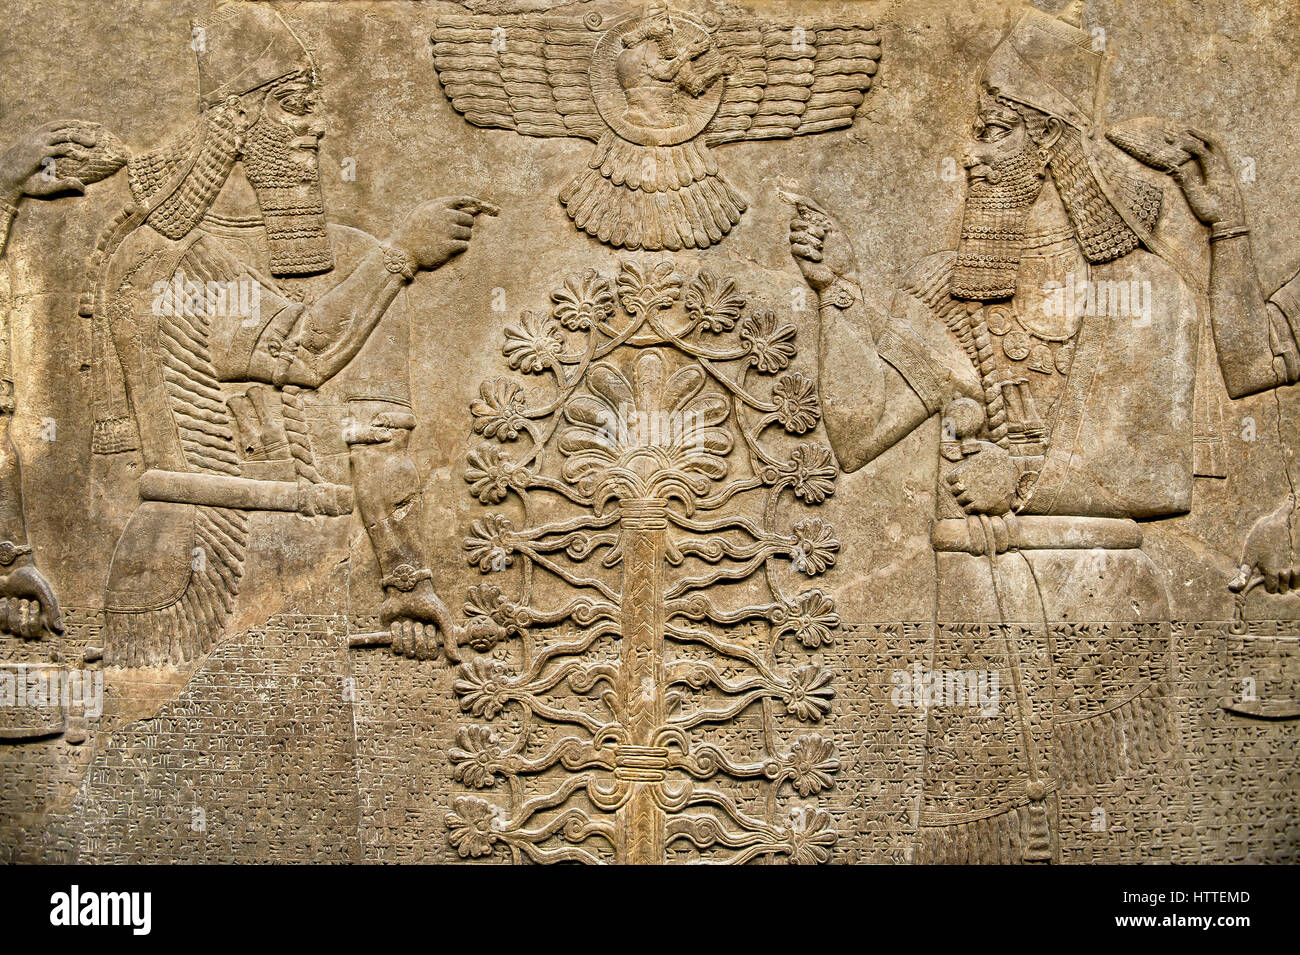 Assyrian relief sculpture panel  of King  Ashurnasirpal II dressed in Ritual robes, he is depicted twice on either side of the central sacred tree of  Stock Photo